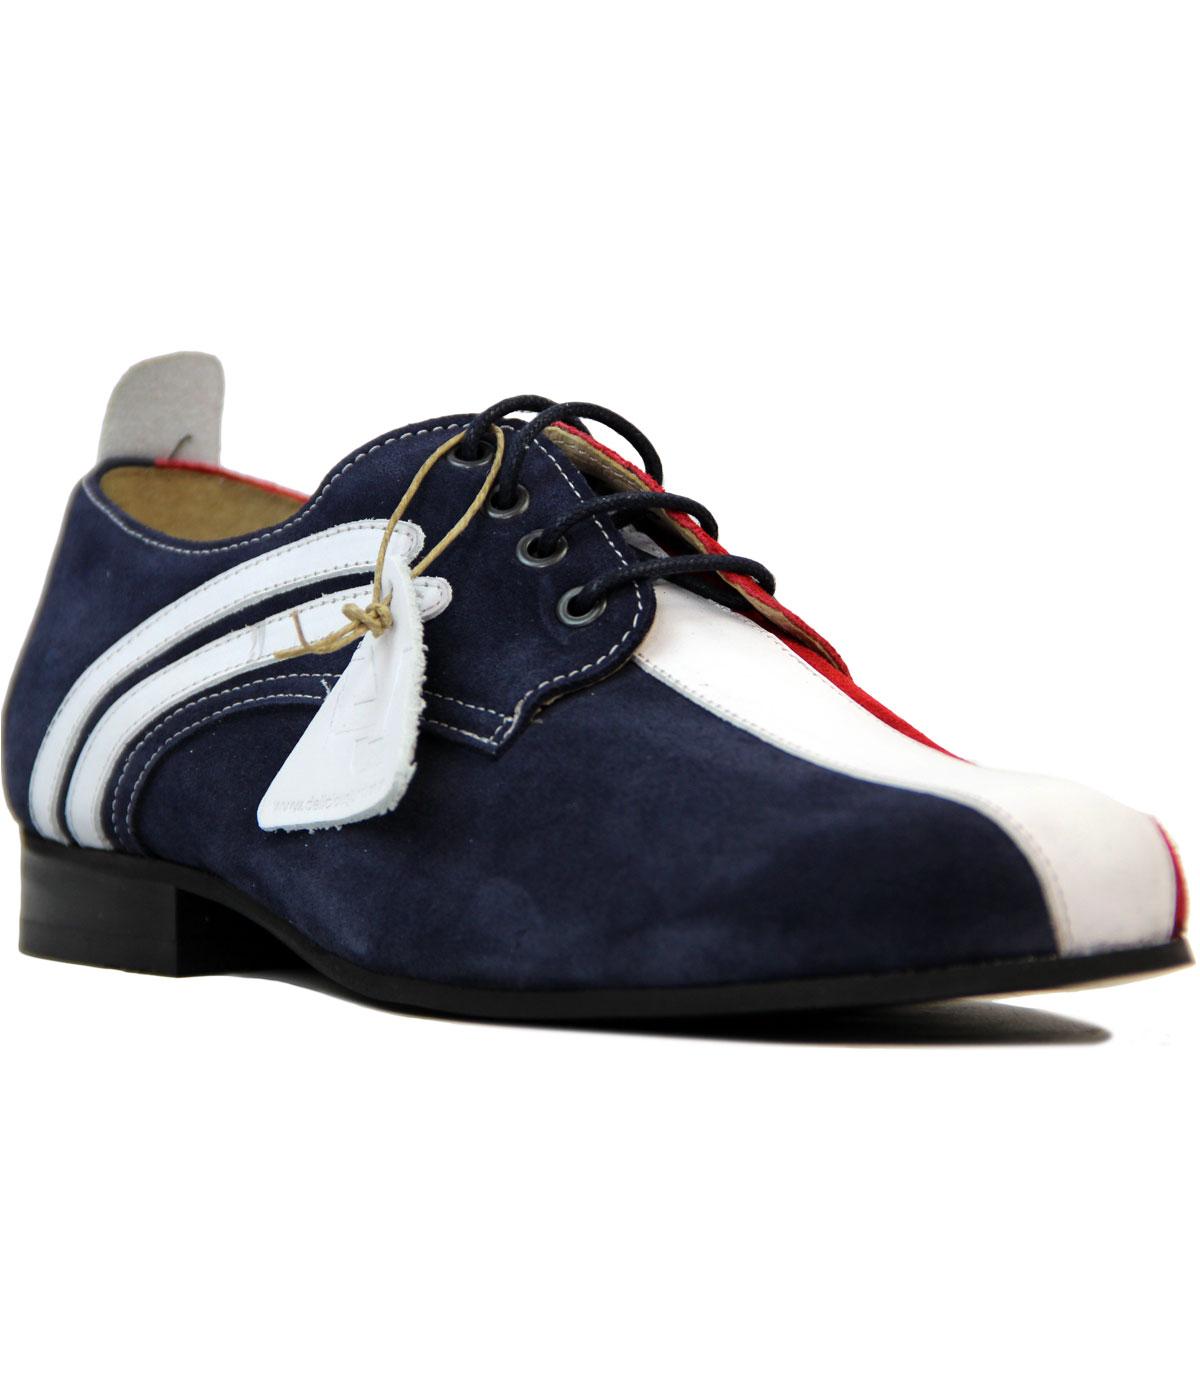 Rifle DELICIOUS JUNCTION Mod Suede Badger Shoes RW